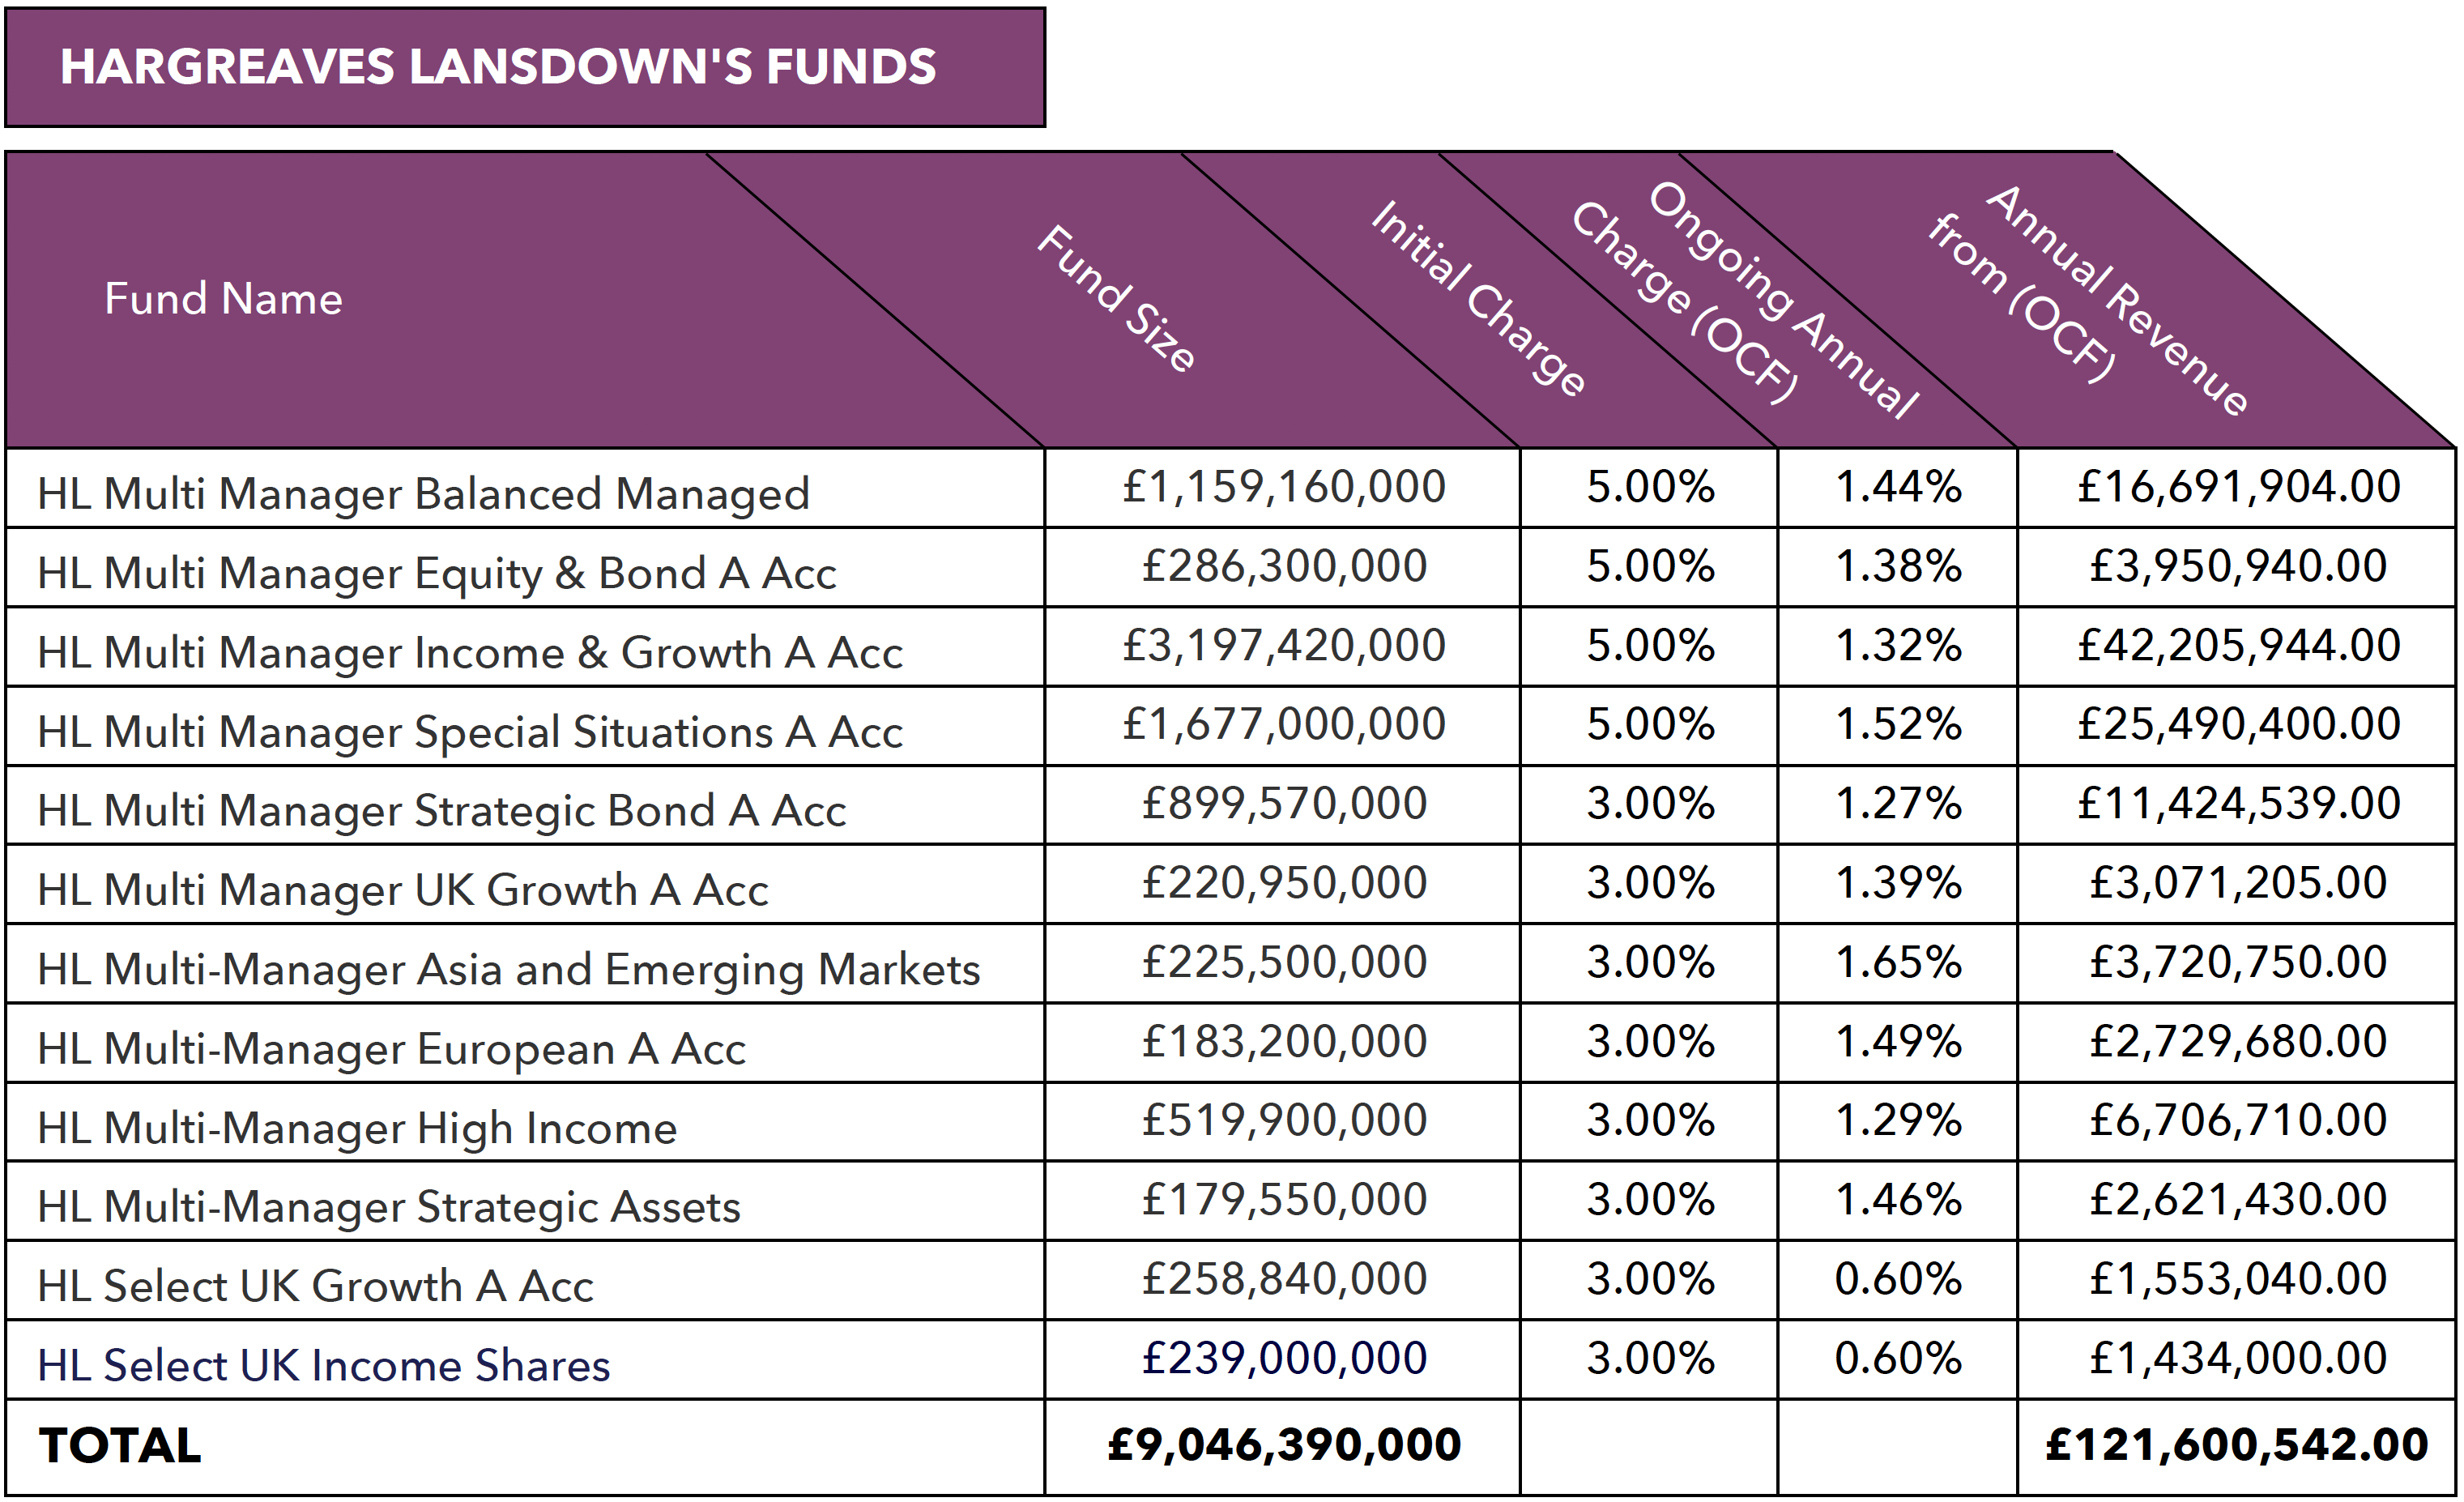 Hargreaves Lansdown Funds